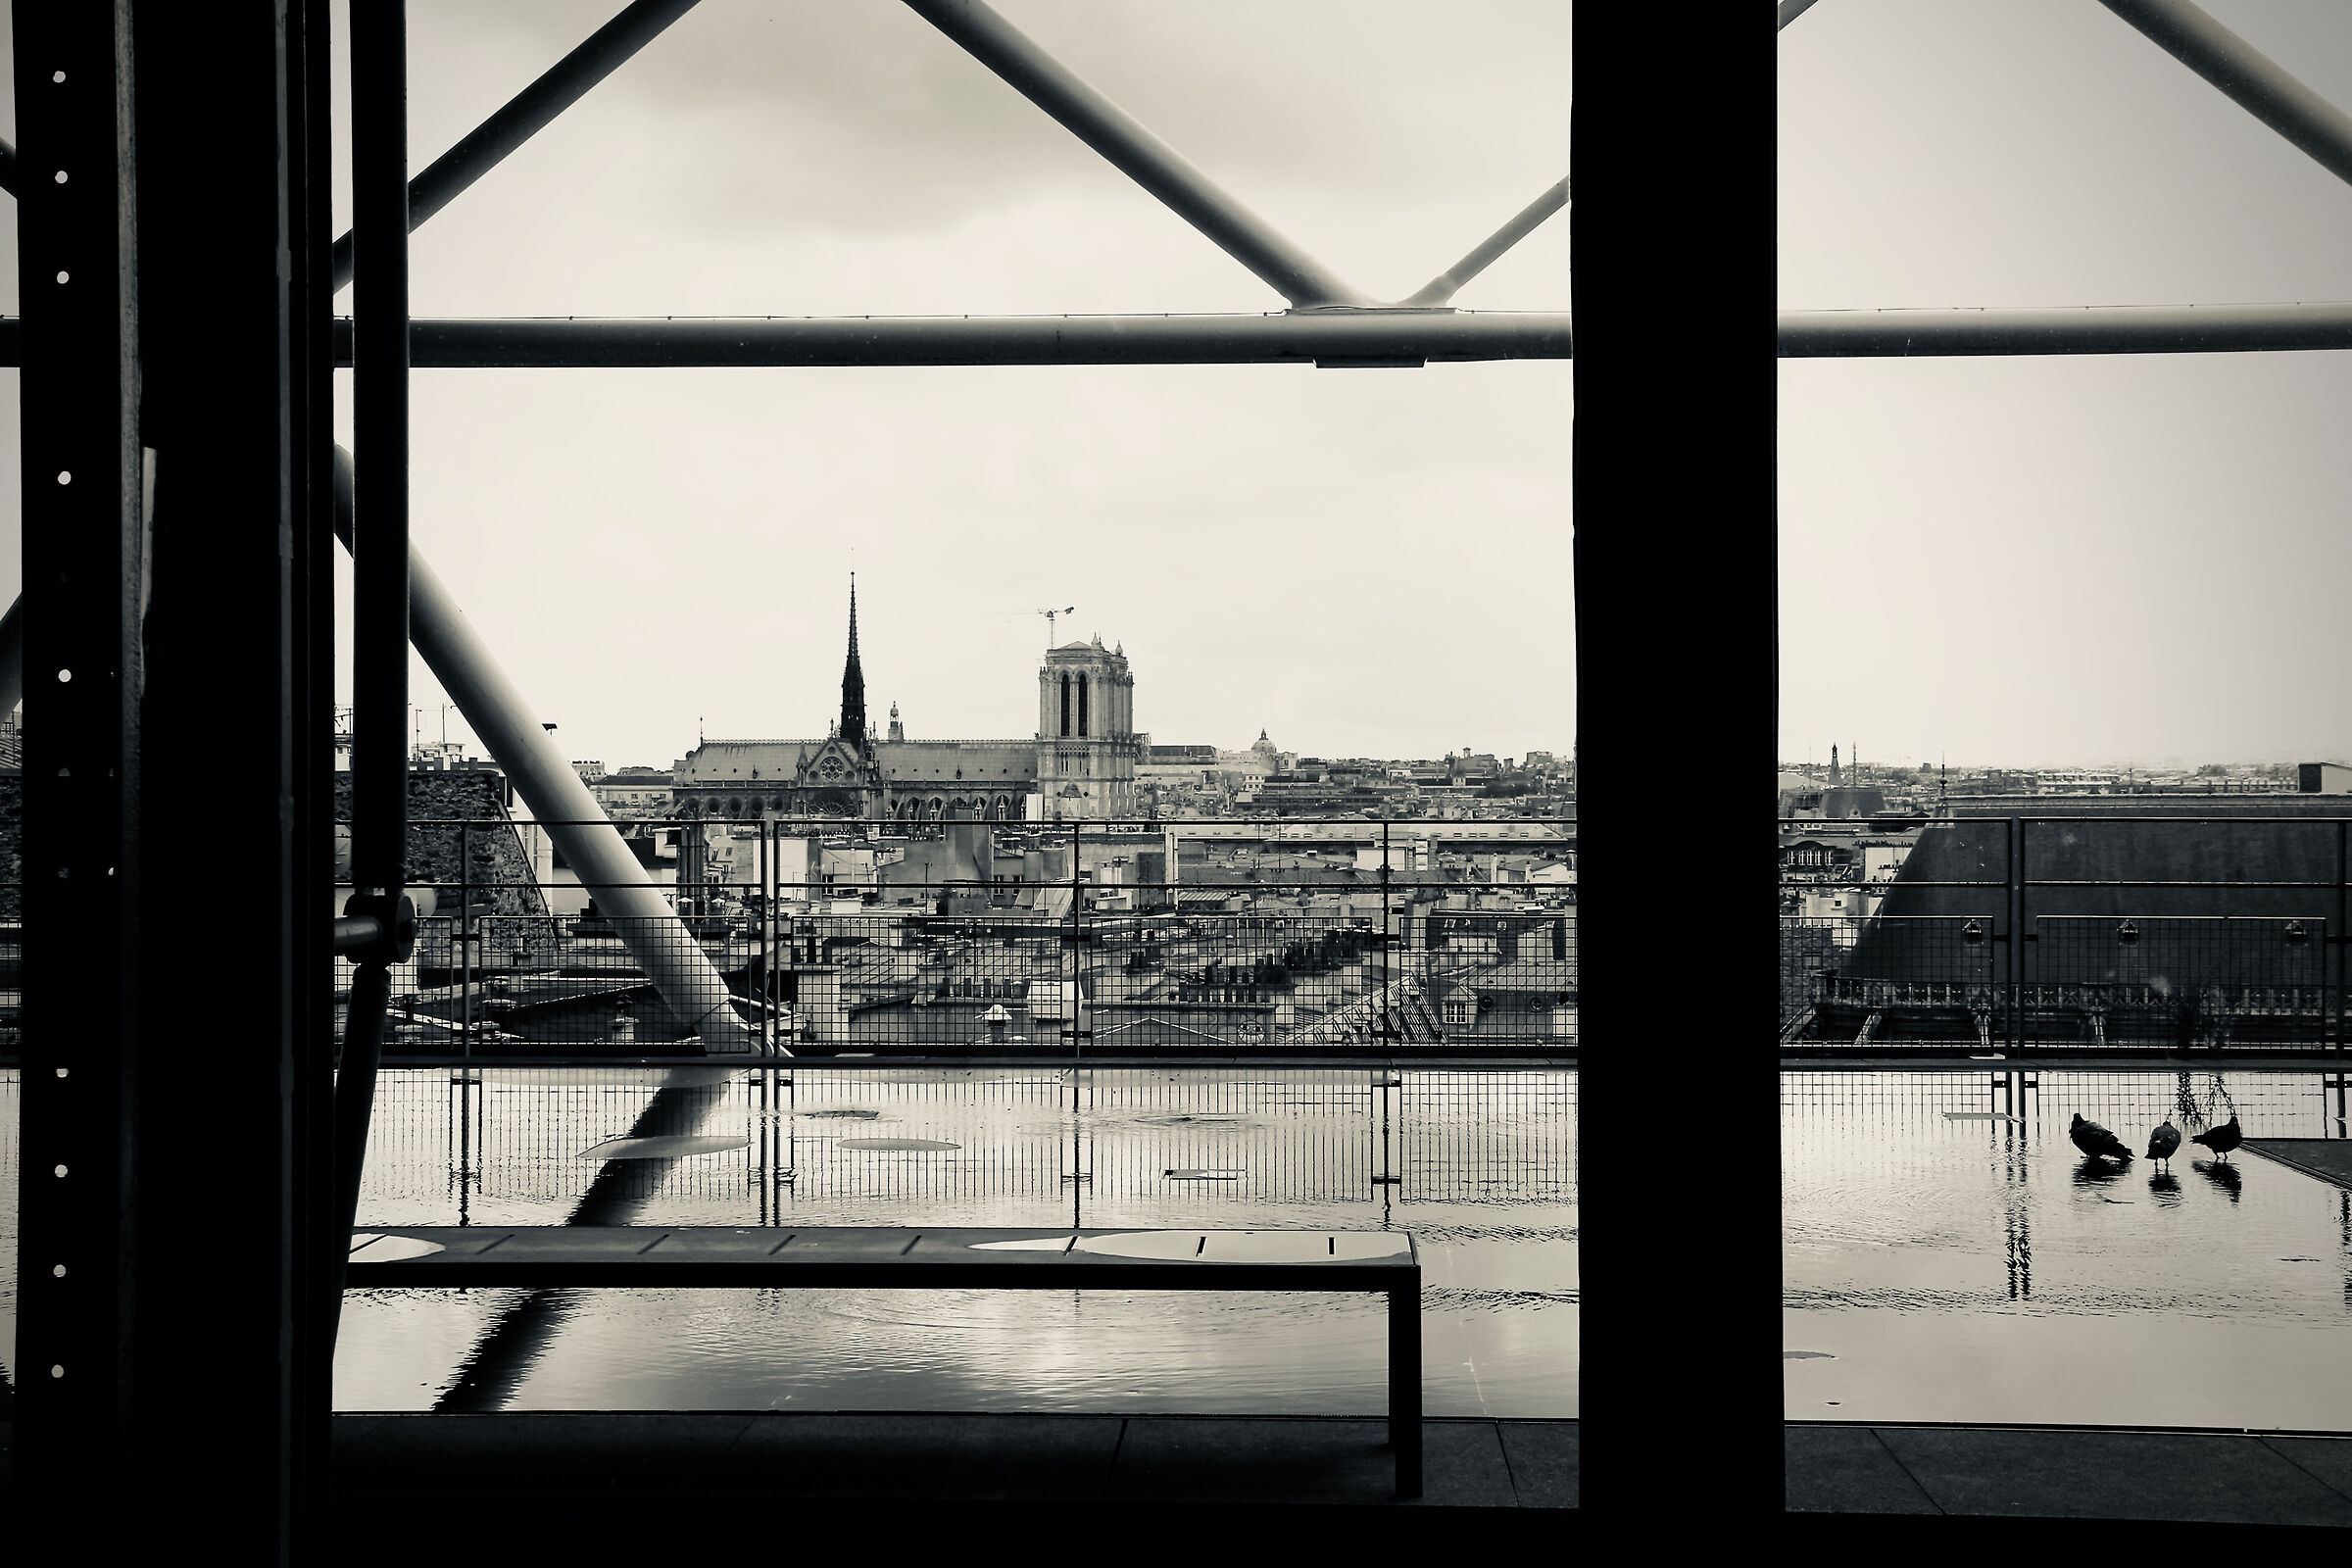 From the Pompidou centre, in the rain...